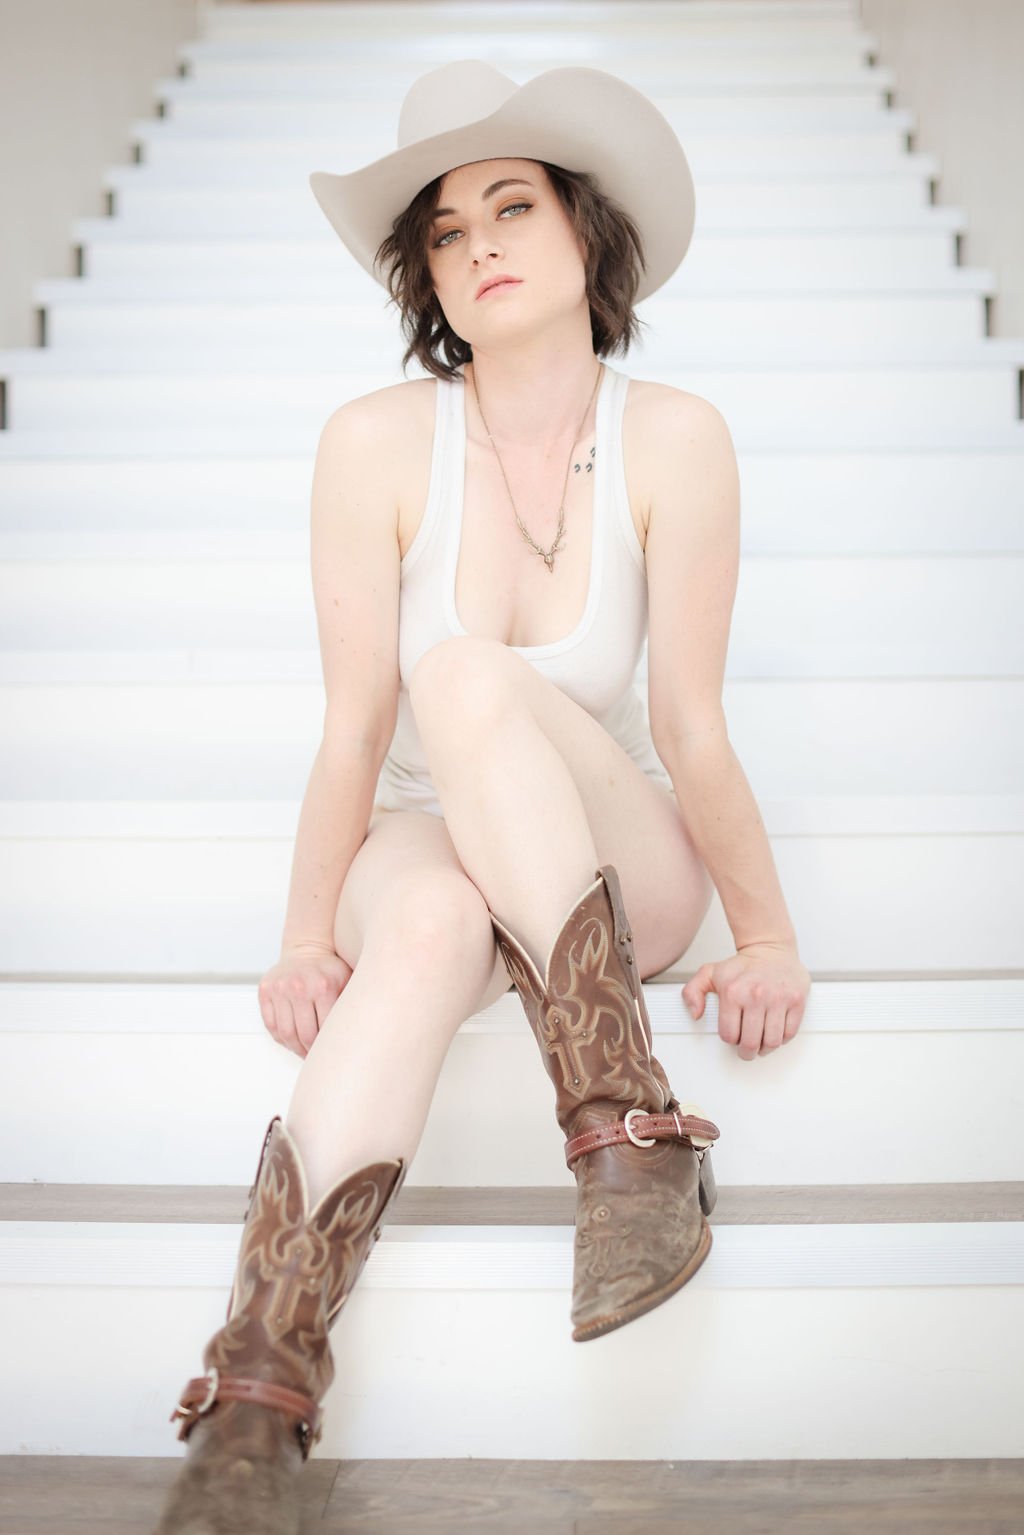 Boudoir session of woman wearing cowboy hat, cowboy boots and sheer white tank.jpg